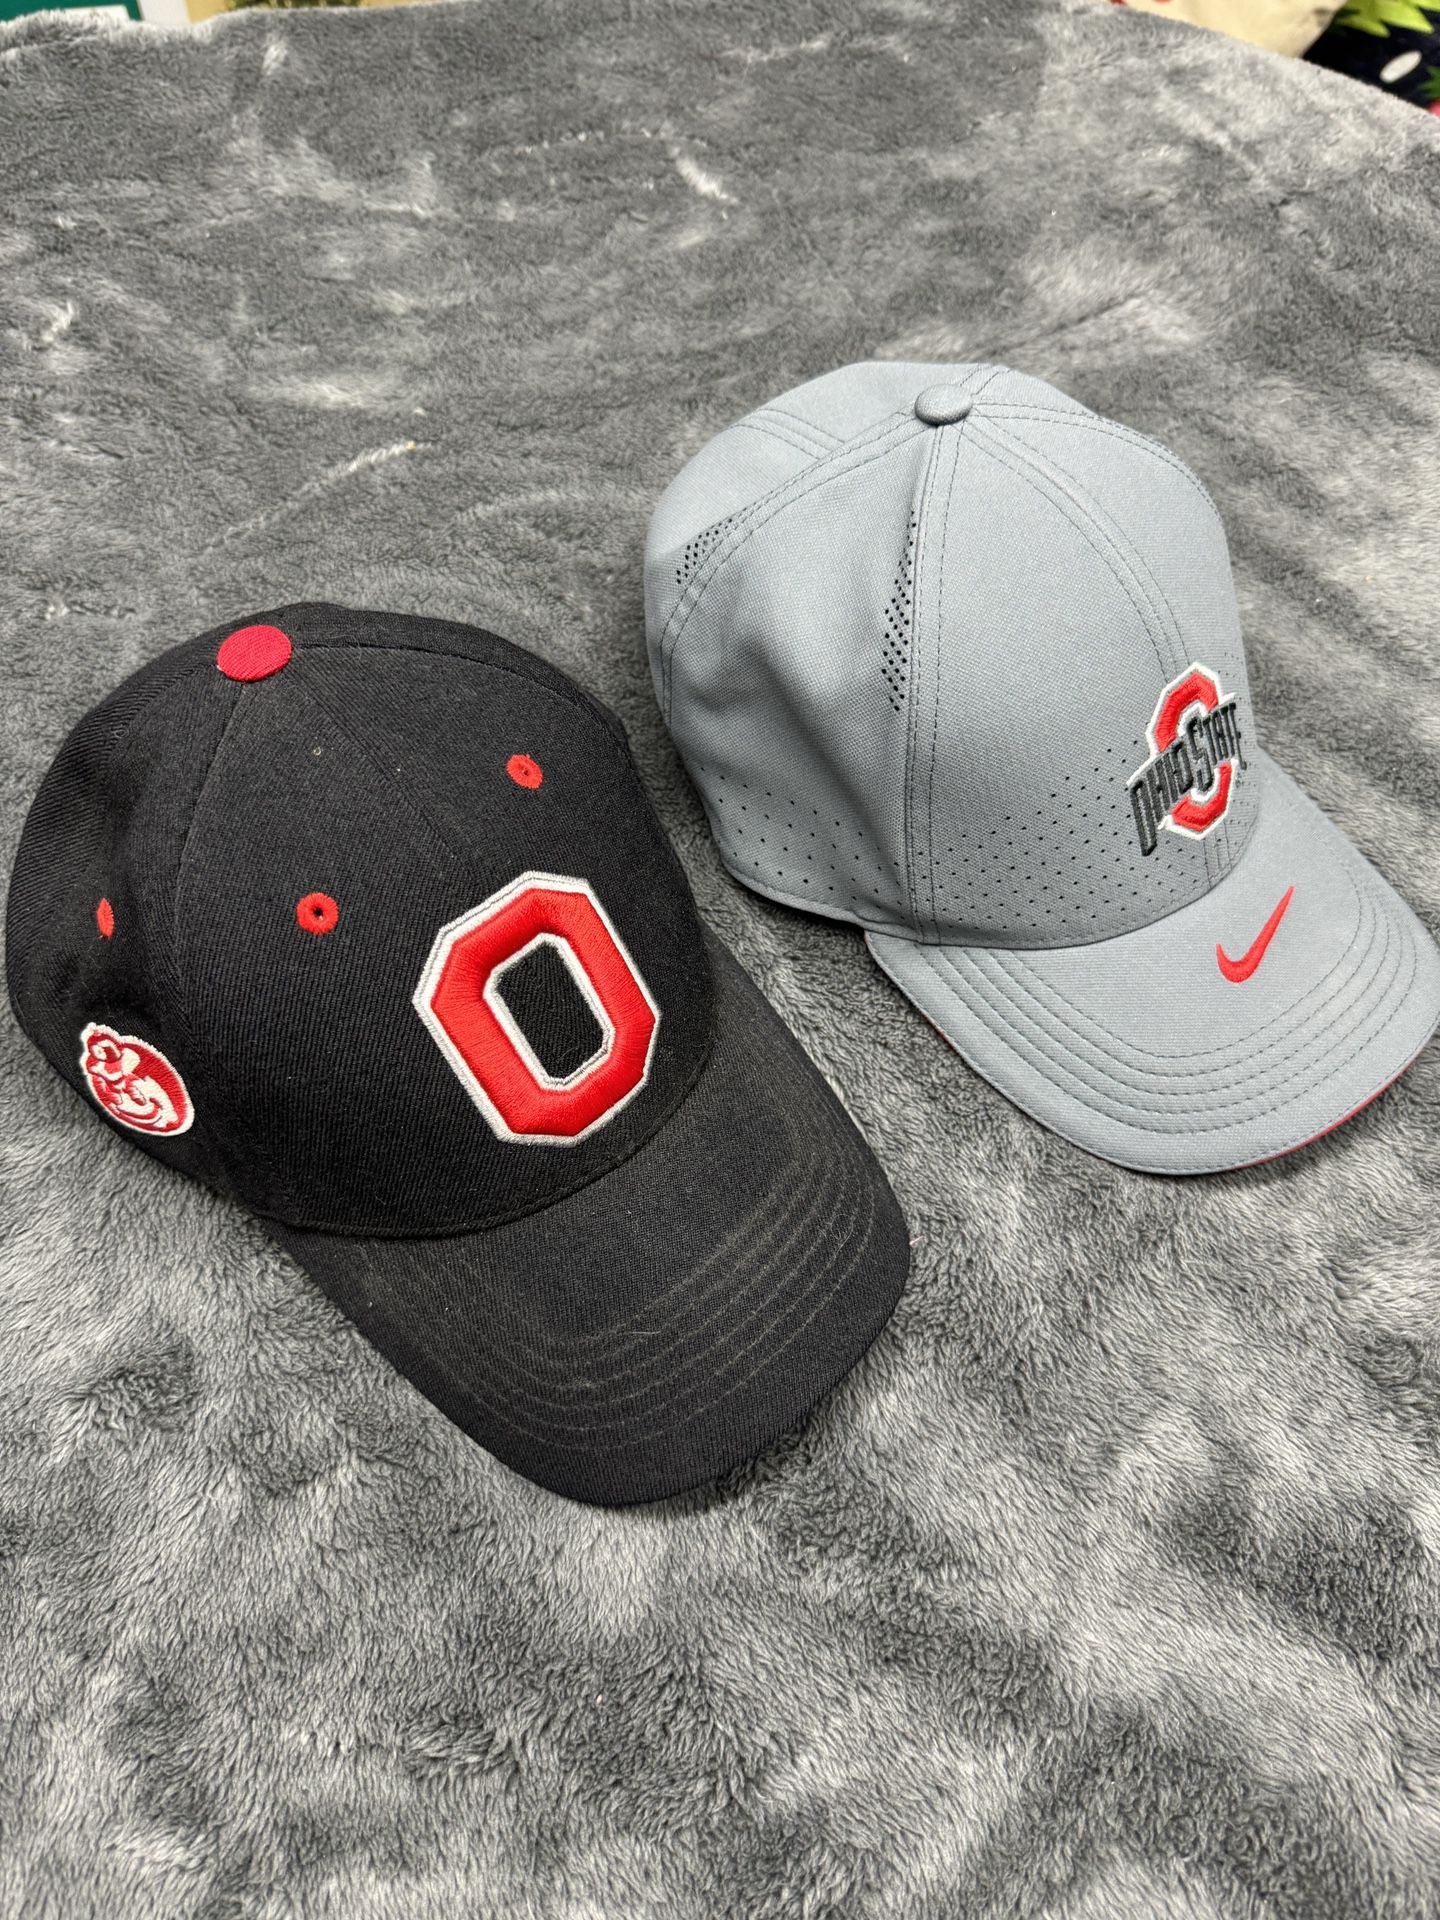 Bundle of 2 Ohio State Adjustable Back Hats in good shape!  Gray Nike hat was only worn once.